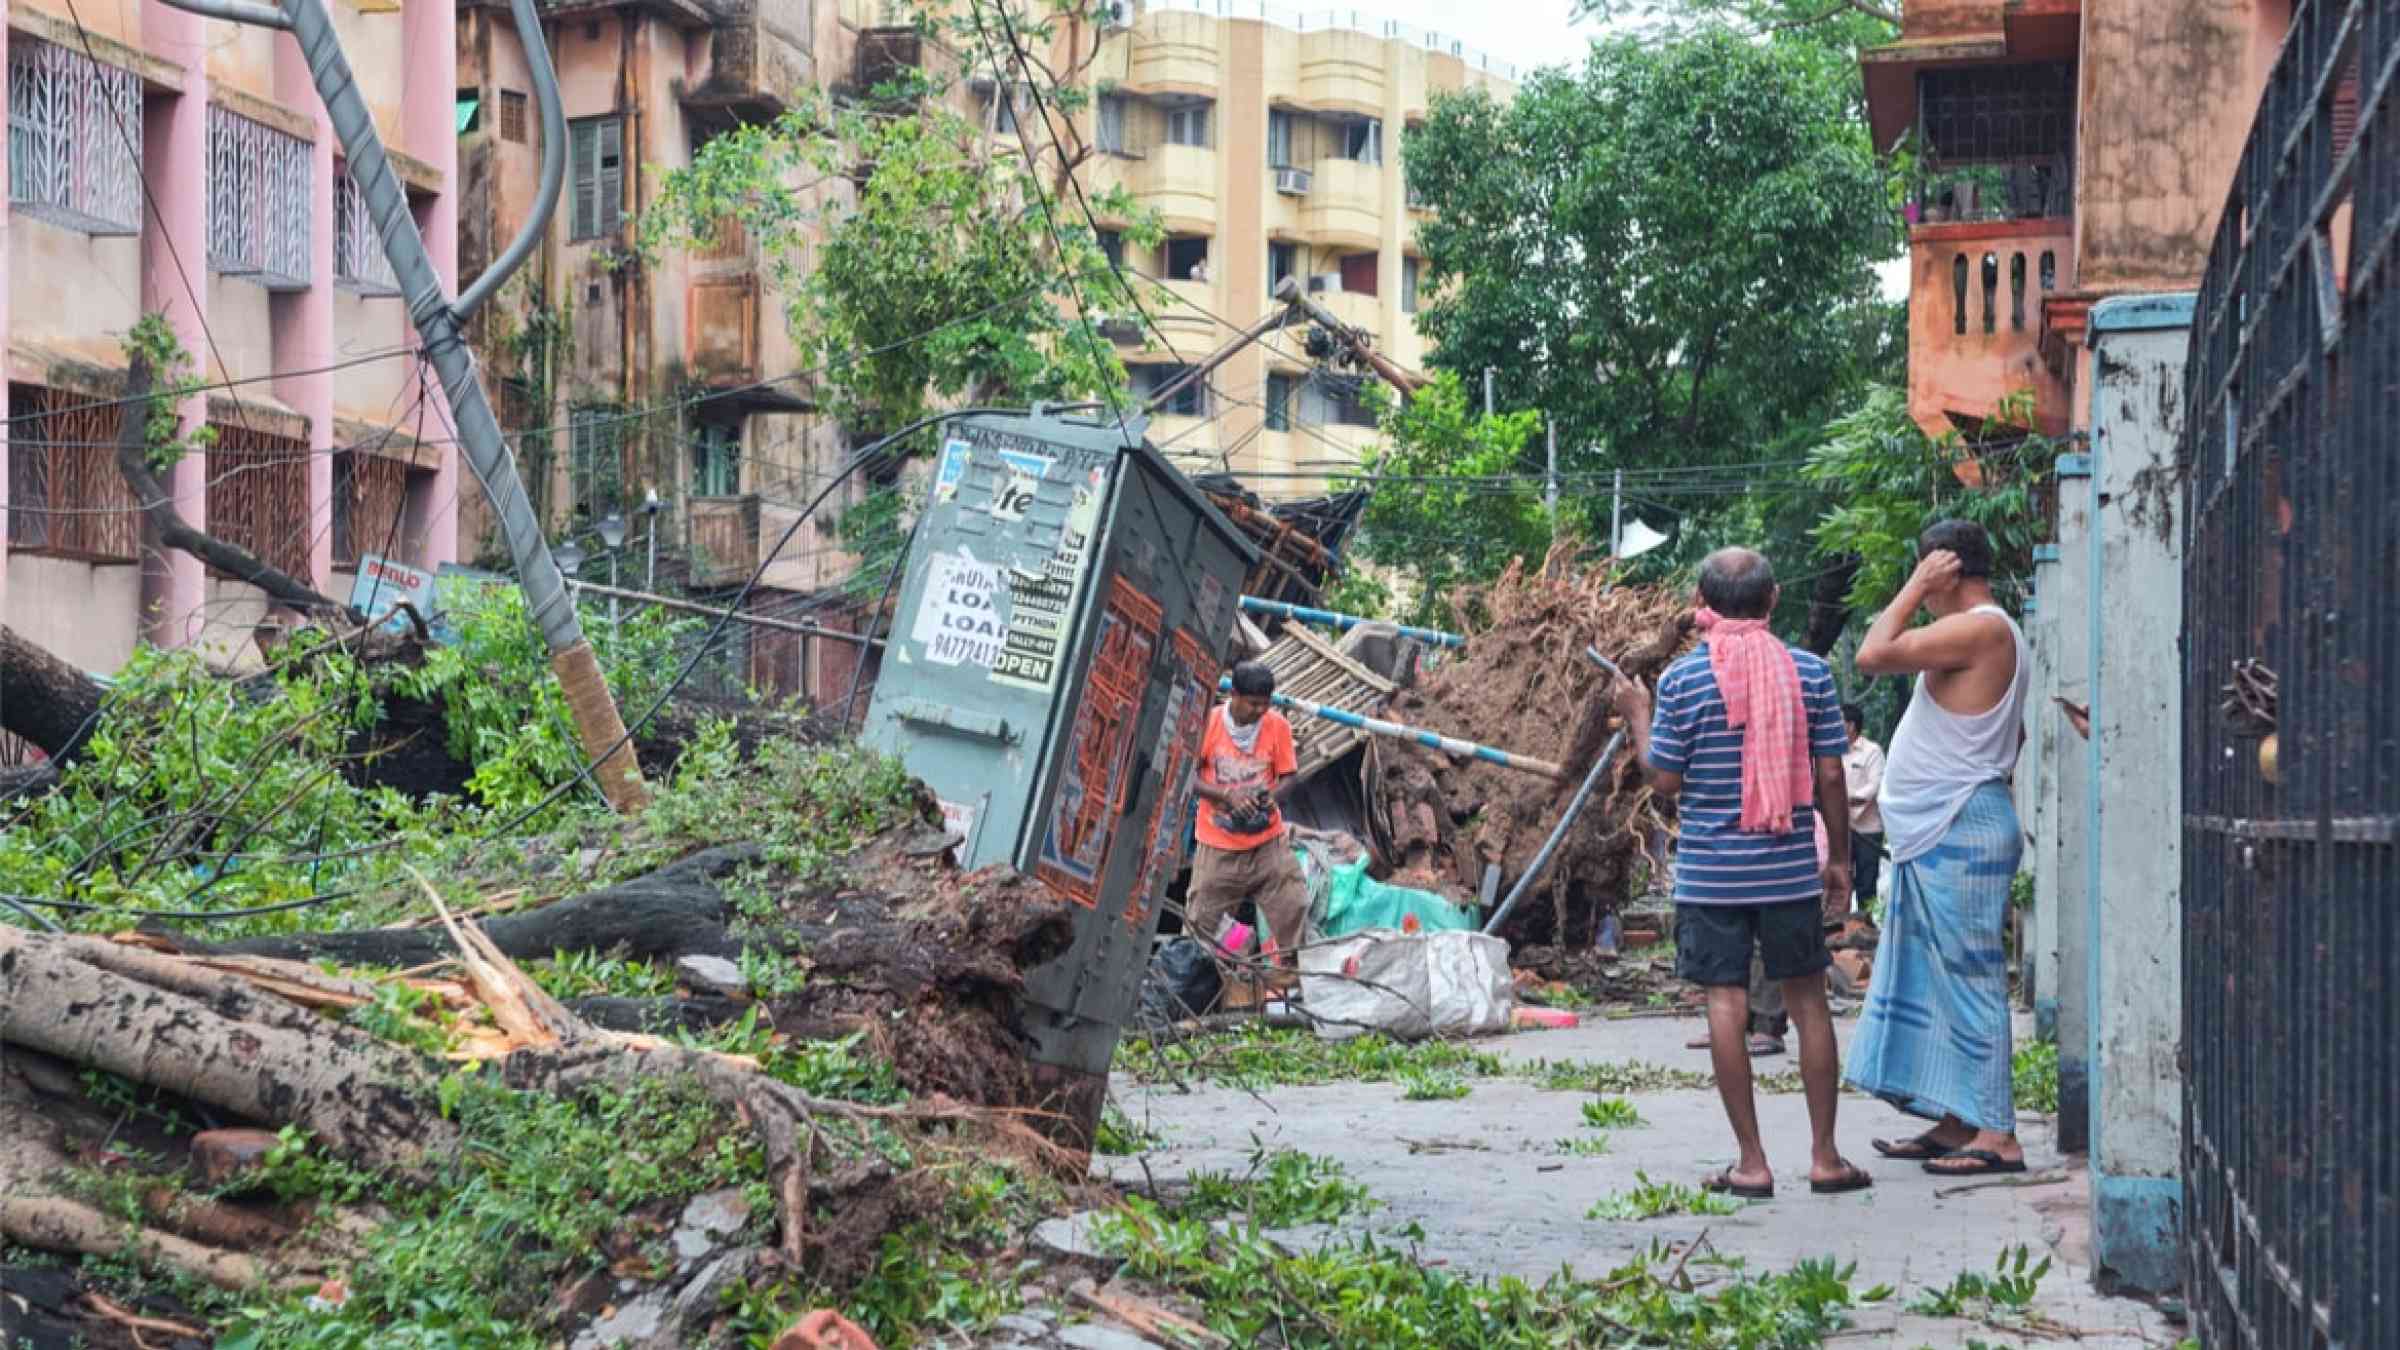 Ravaged residential area after cyclonic storm Amphan hit the city of Kolkatta